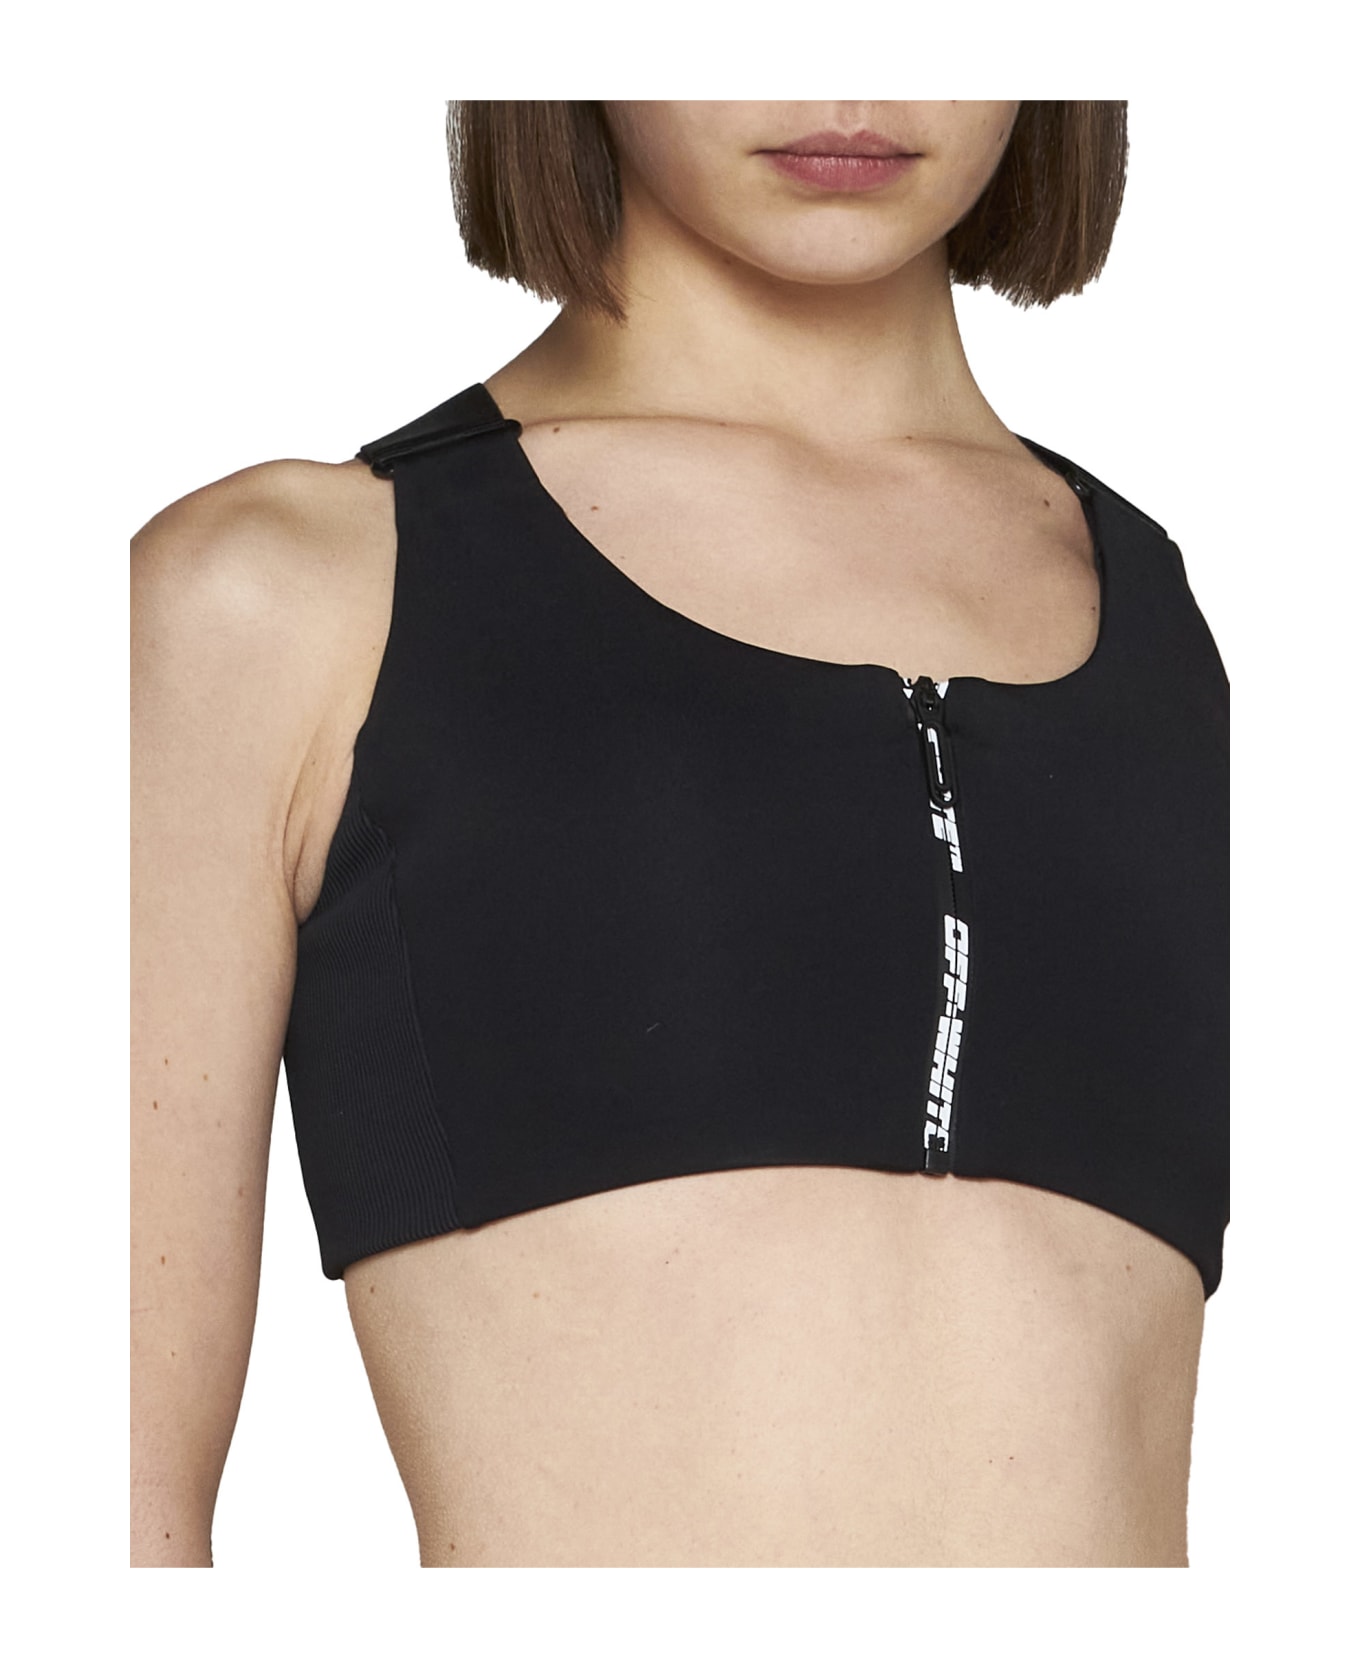 Off-White Sporty Crop Top - BLACK (Black) トップス